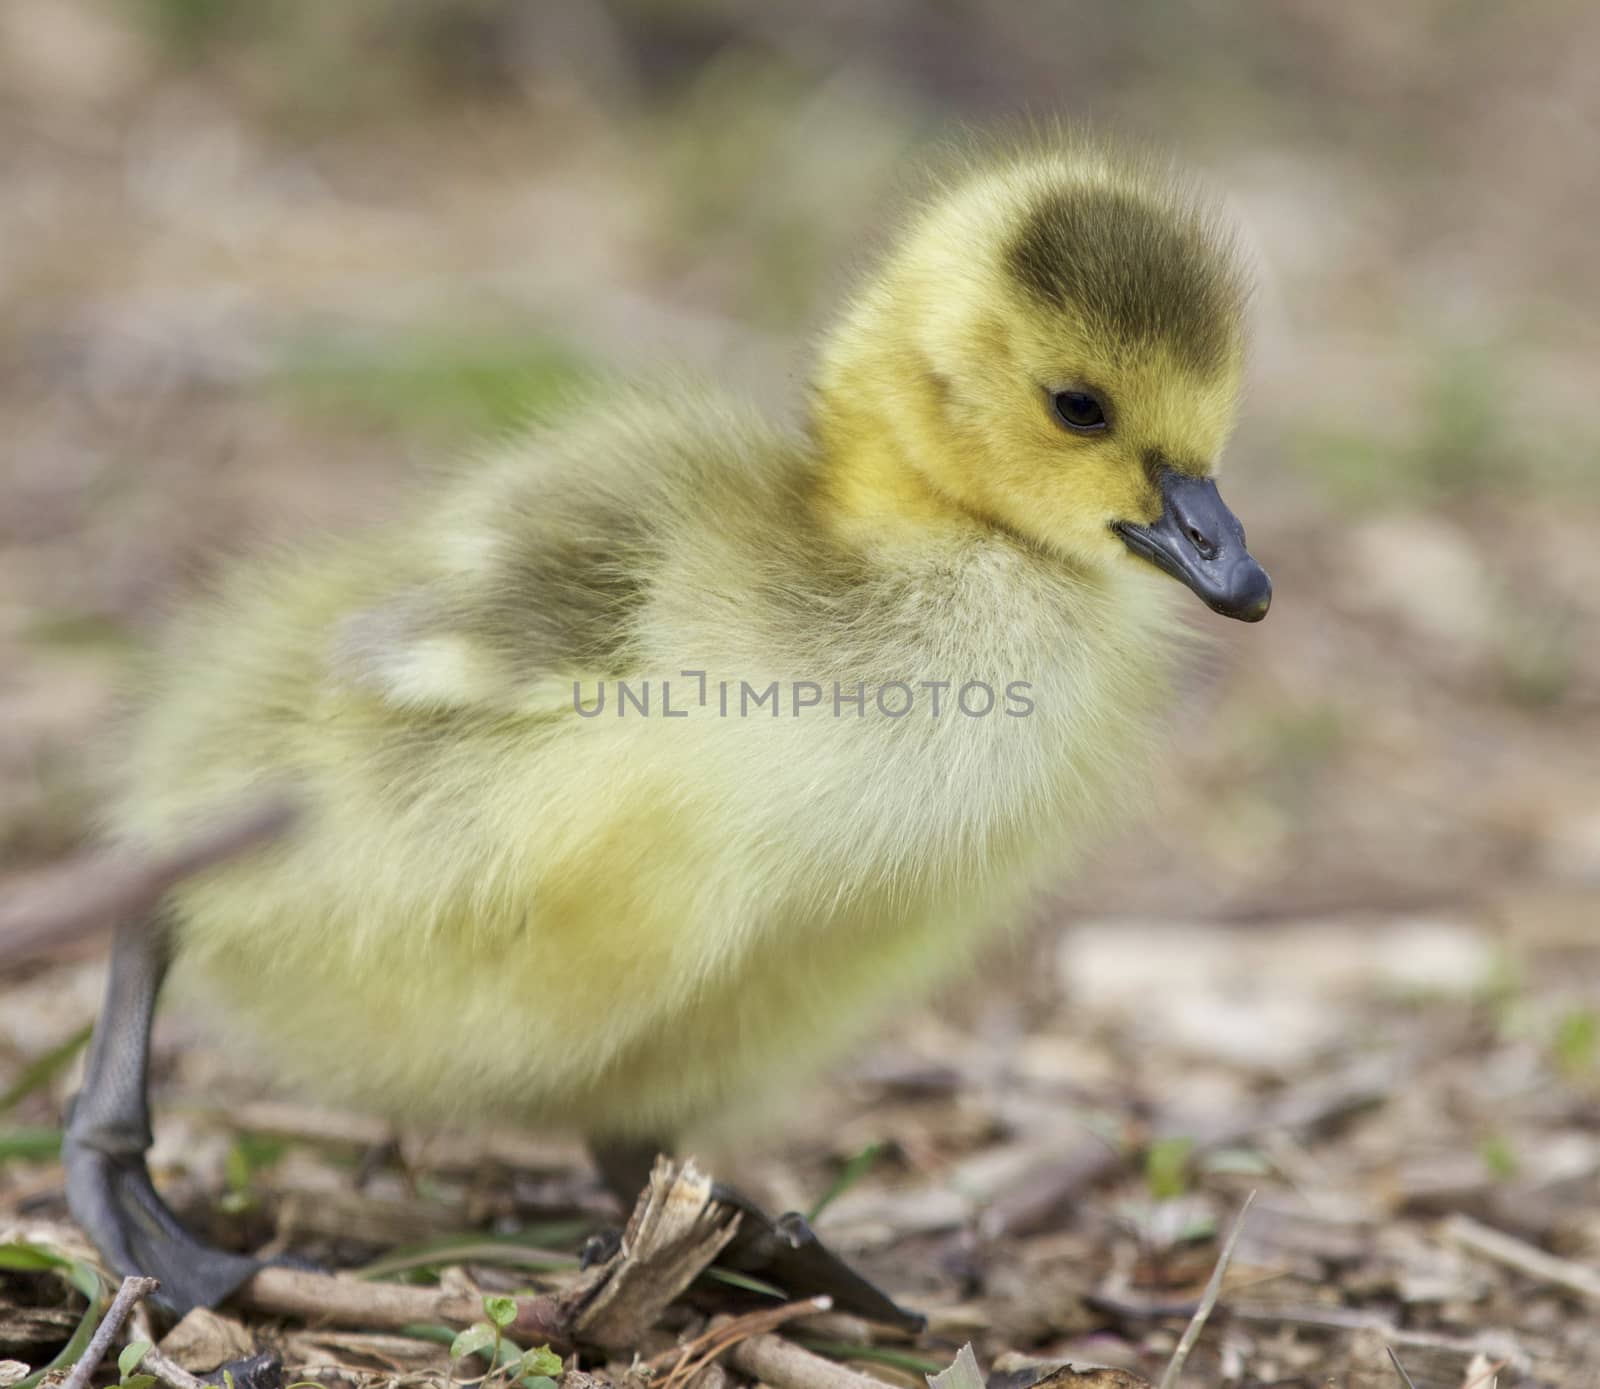 Beautiful isolated photo of a cute chick of Canada geese walking somewhere